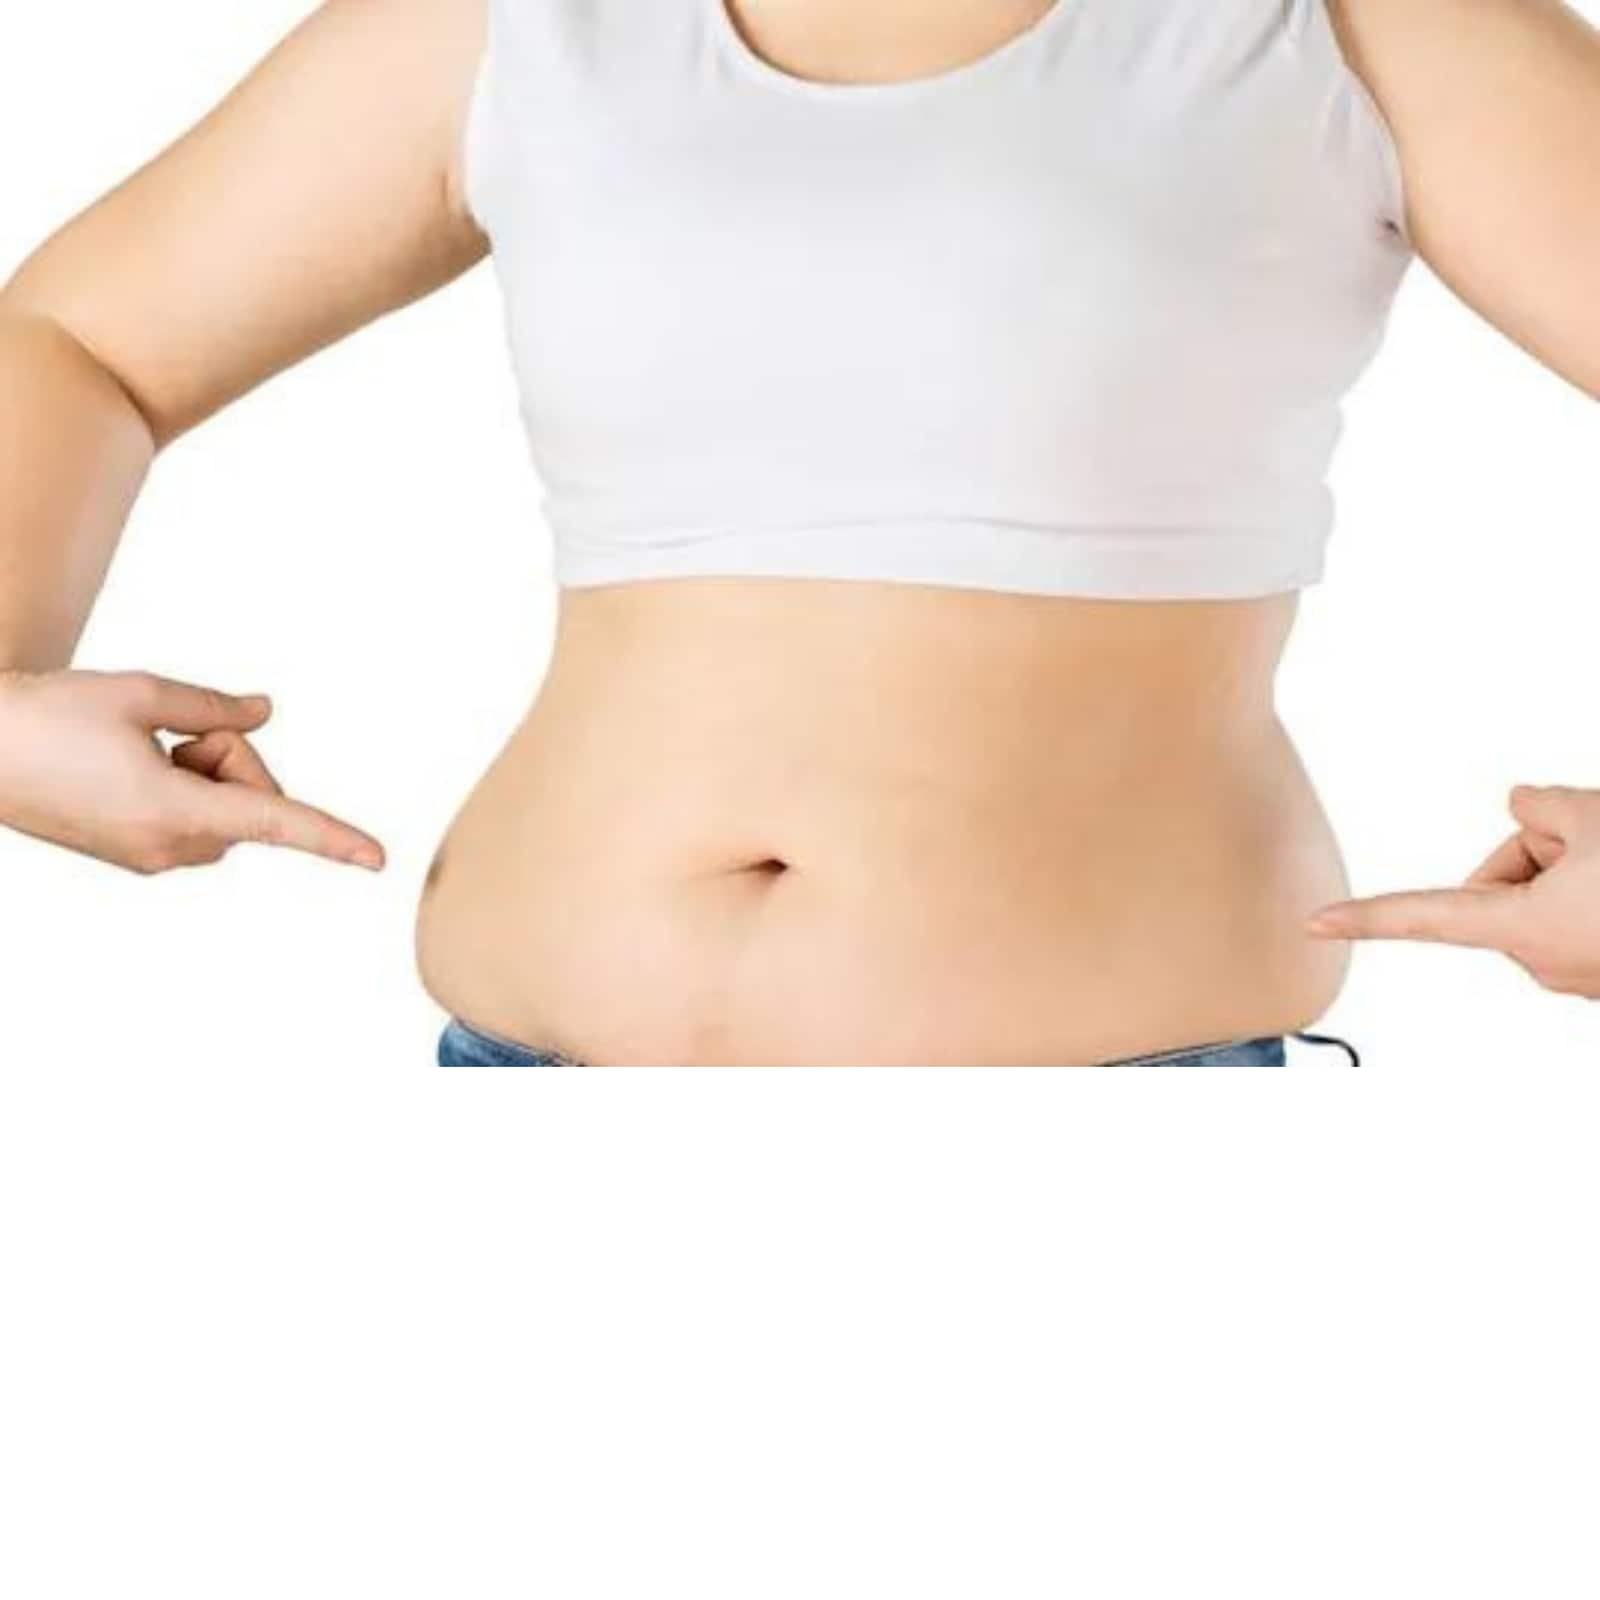 Four Exercises That Will Help You Get Rid of Belly Fat - News18